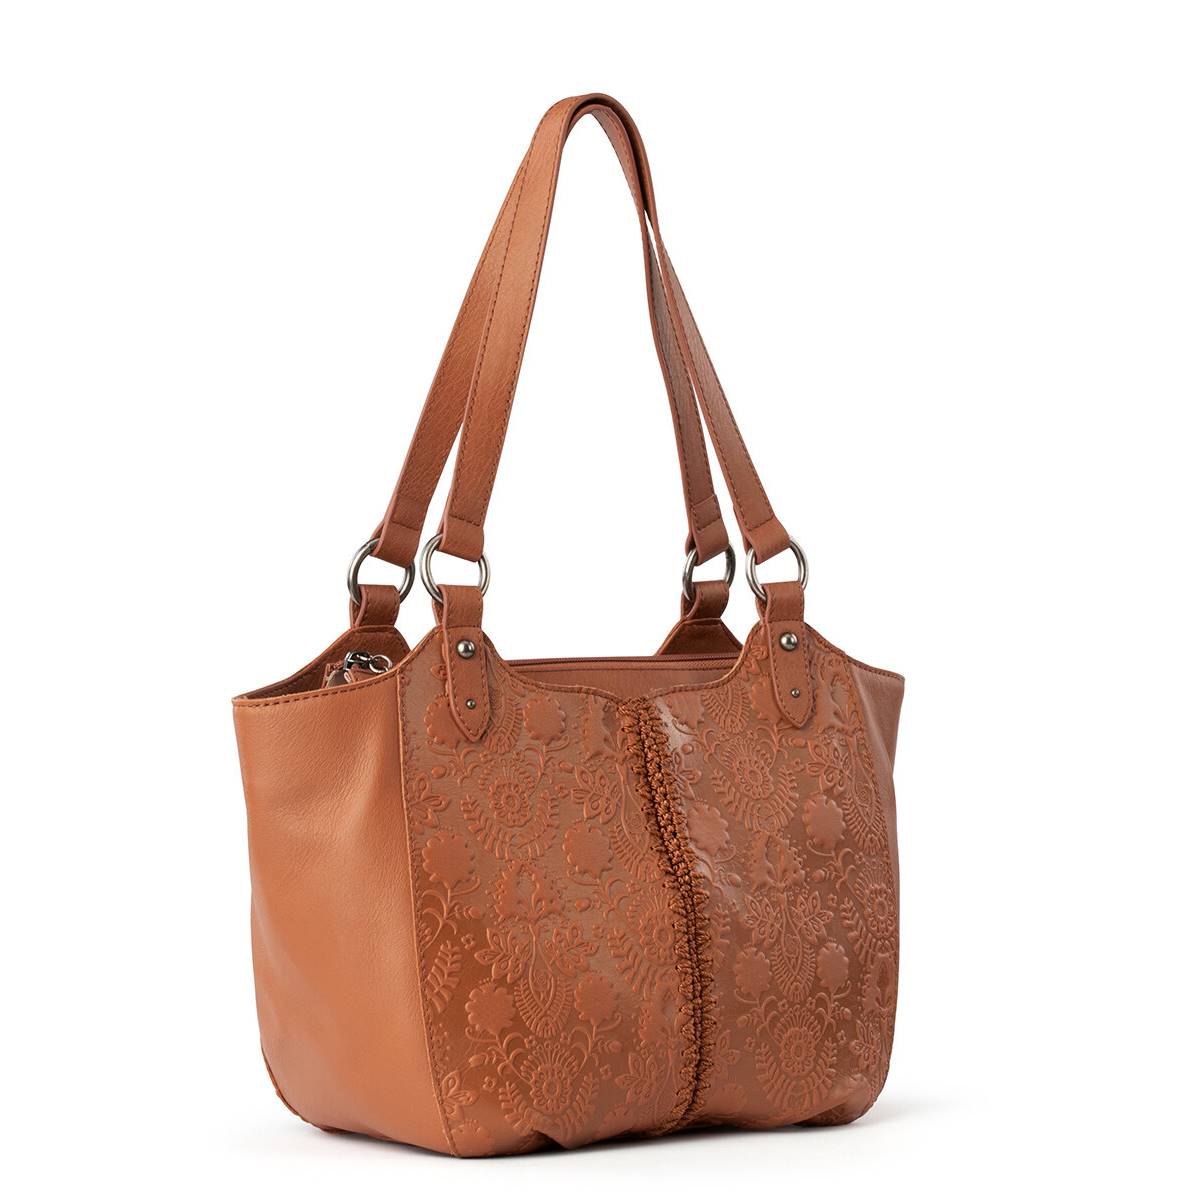 The Sak Bolinas Tote - Tabacco Floral Embossed